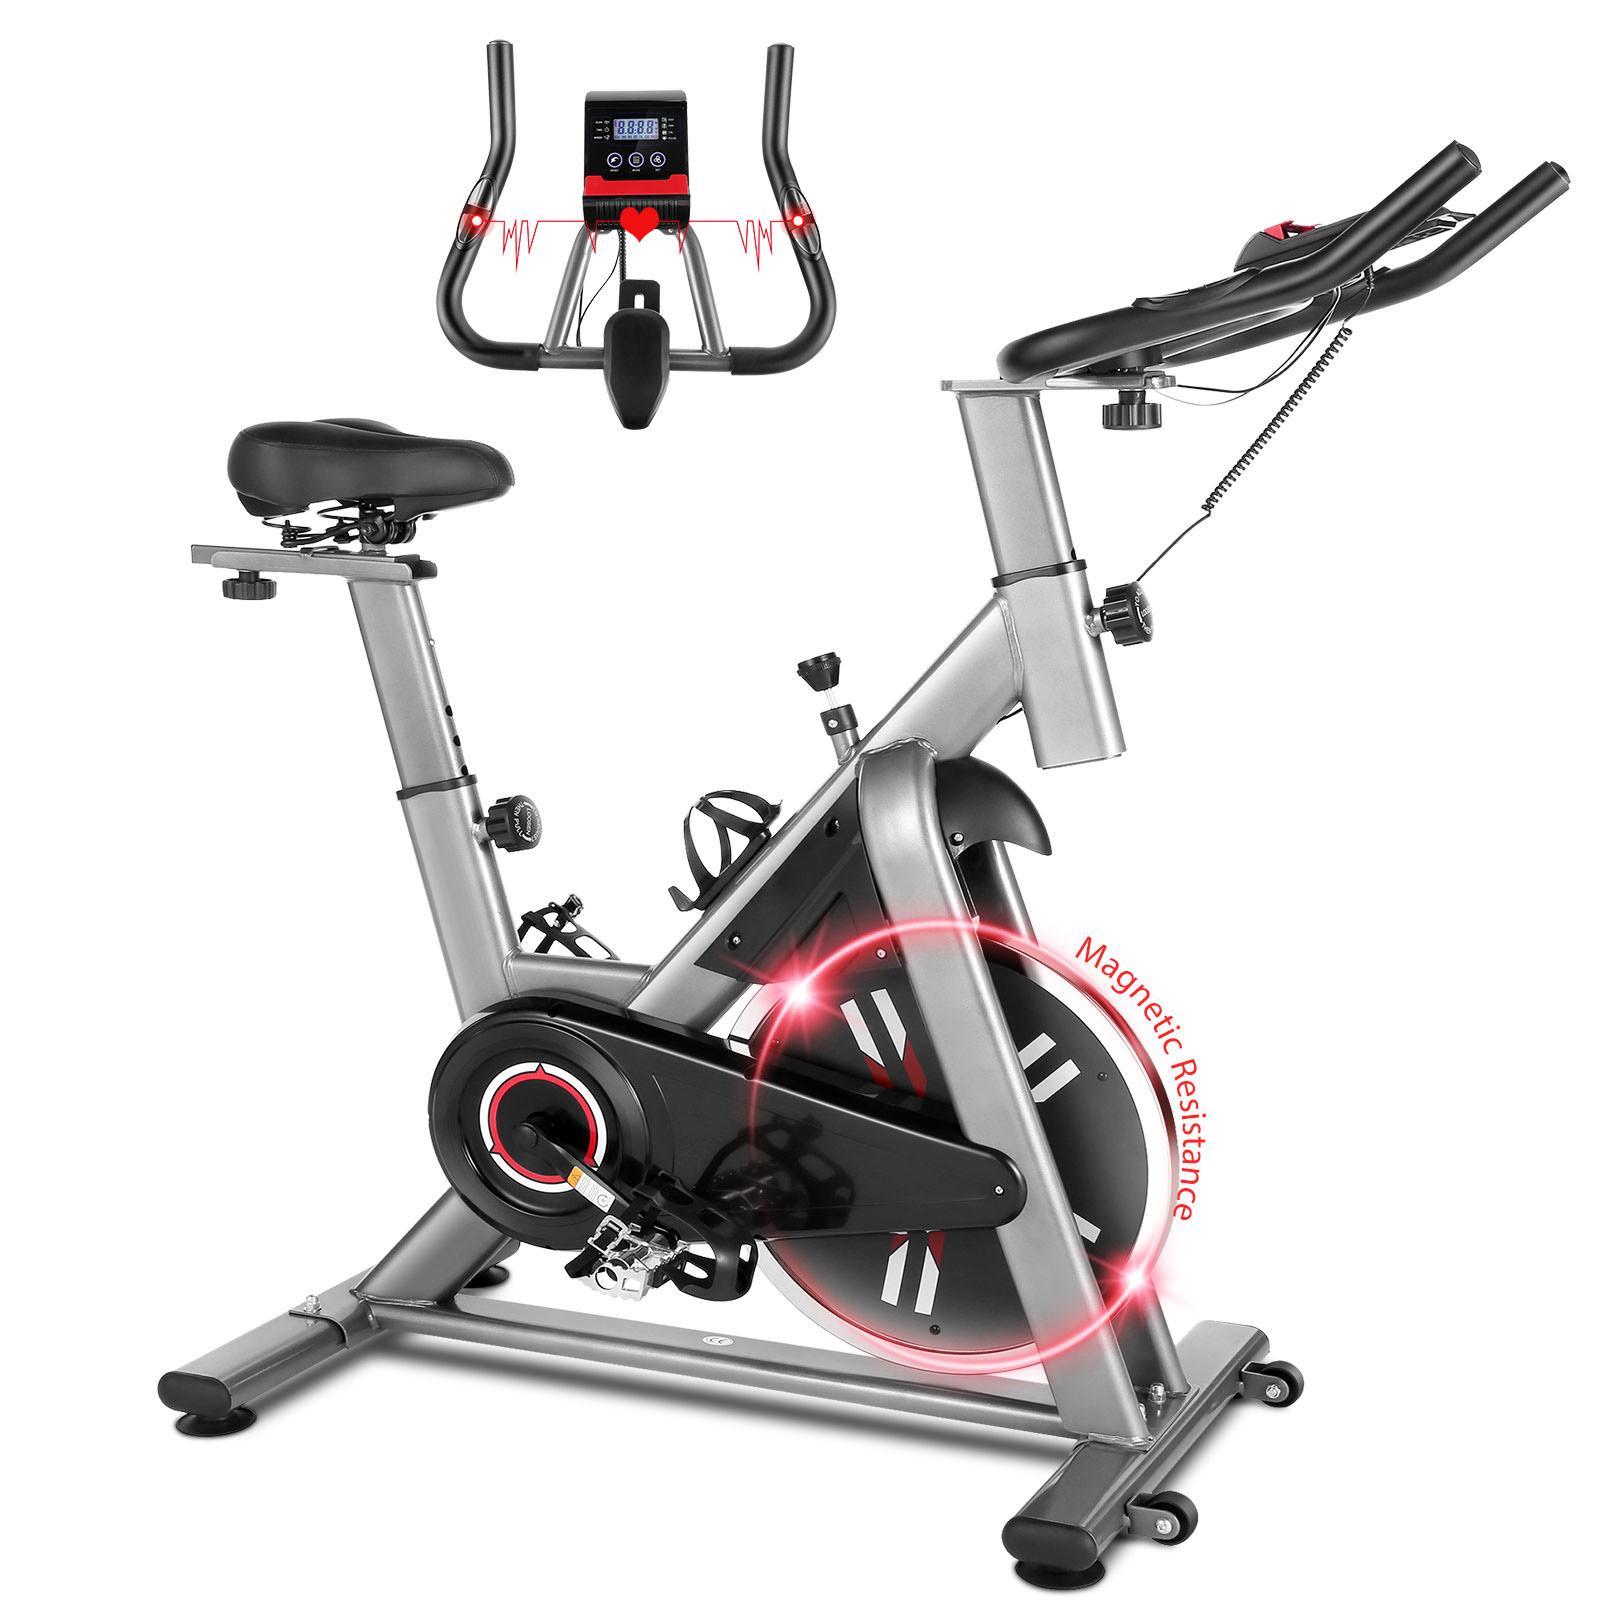 HEKA Indoor Cycling Exercise Bike Upright Cycling Fitness Stationary Cycling Bicycle Cardio Home Workout Max Weight 330 Lbs